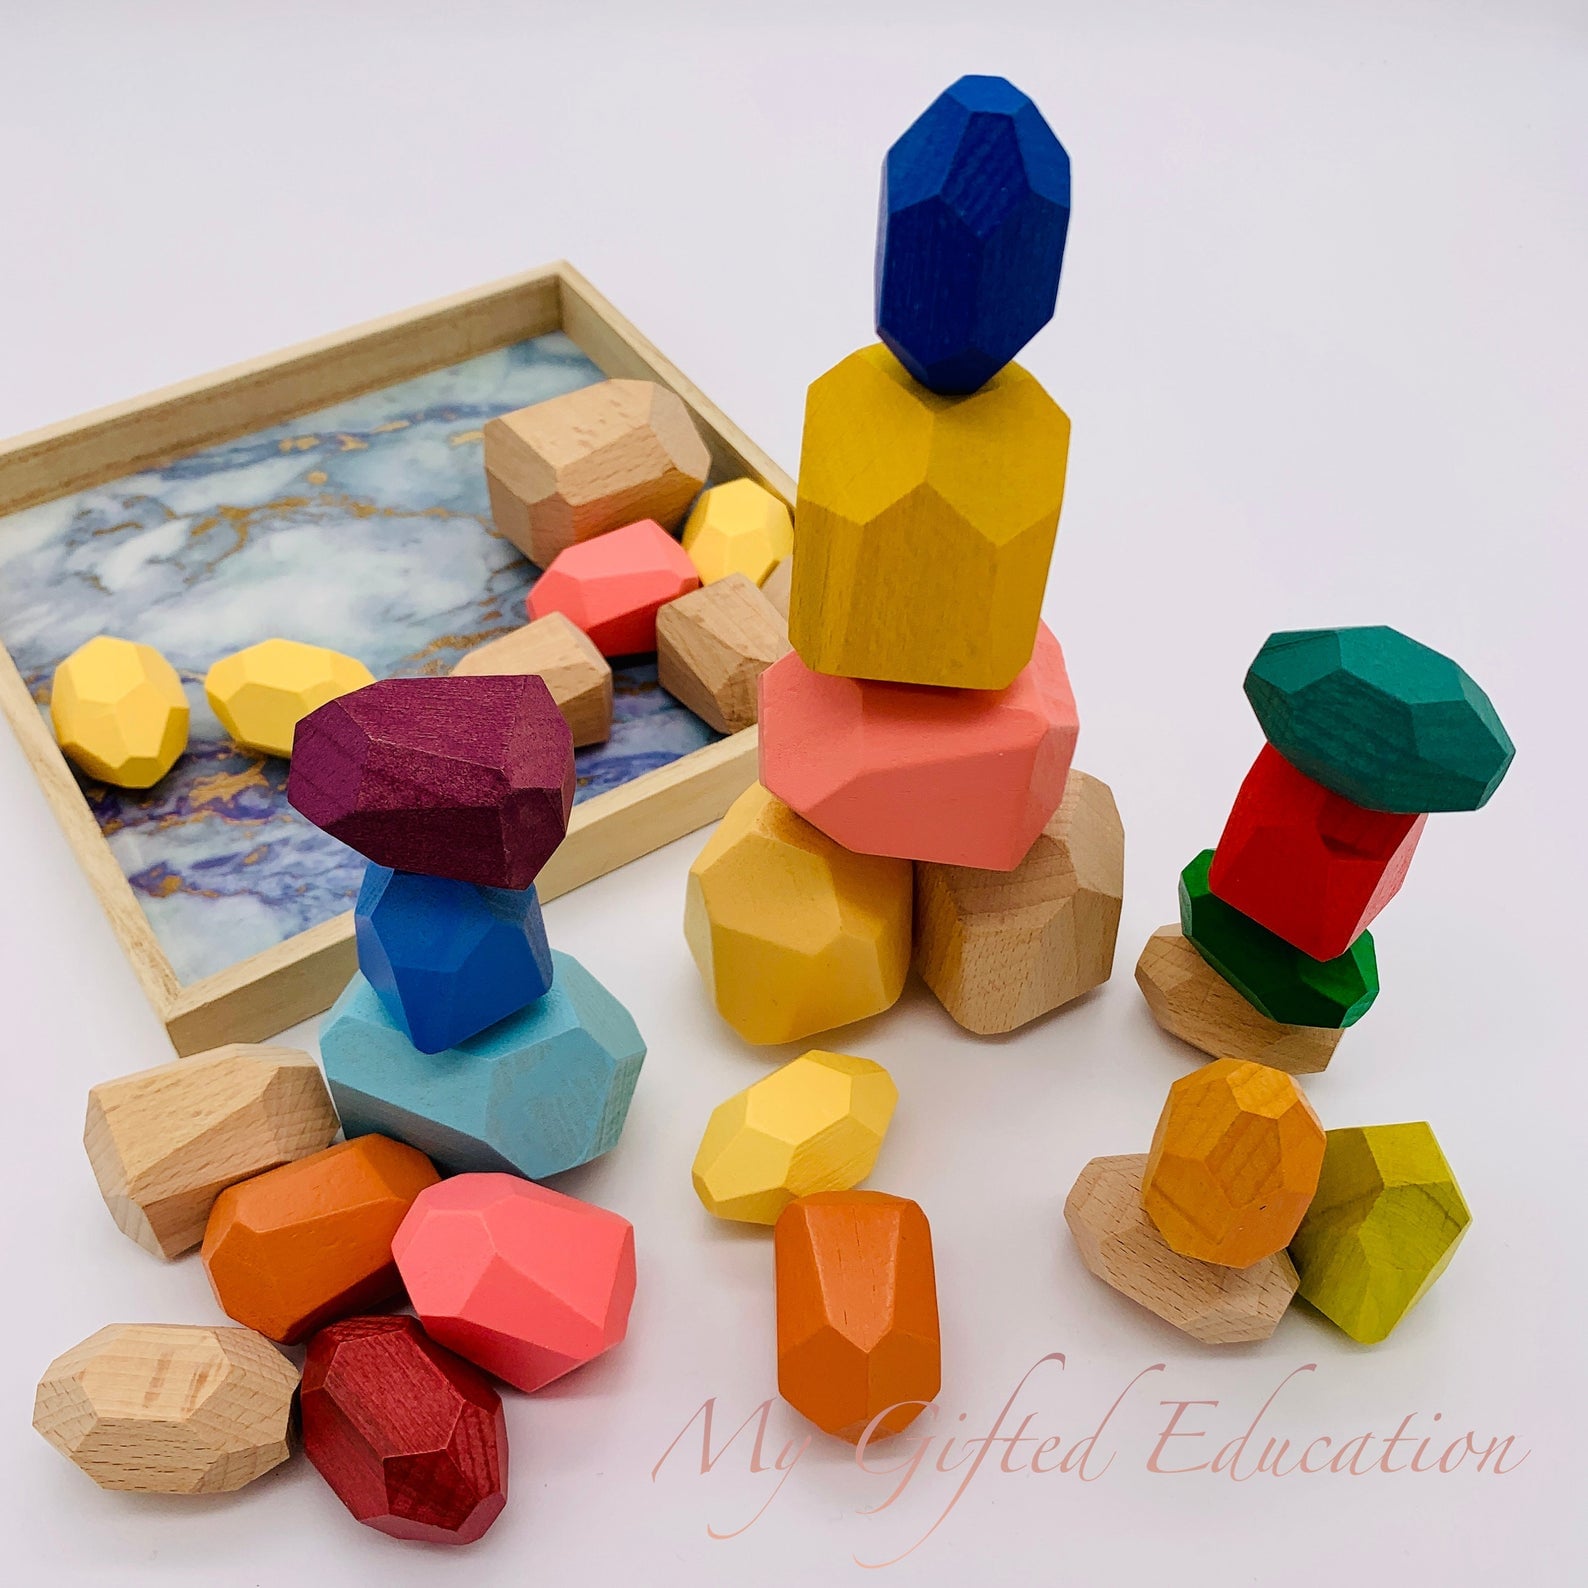 My Gifted Education Wooden Stacking Balancing Rainbow Stones